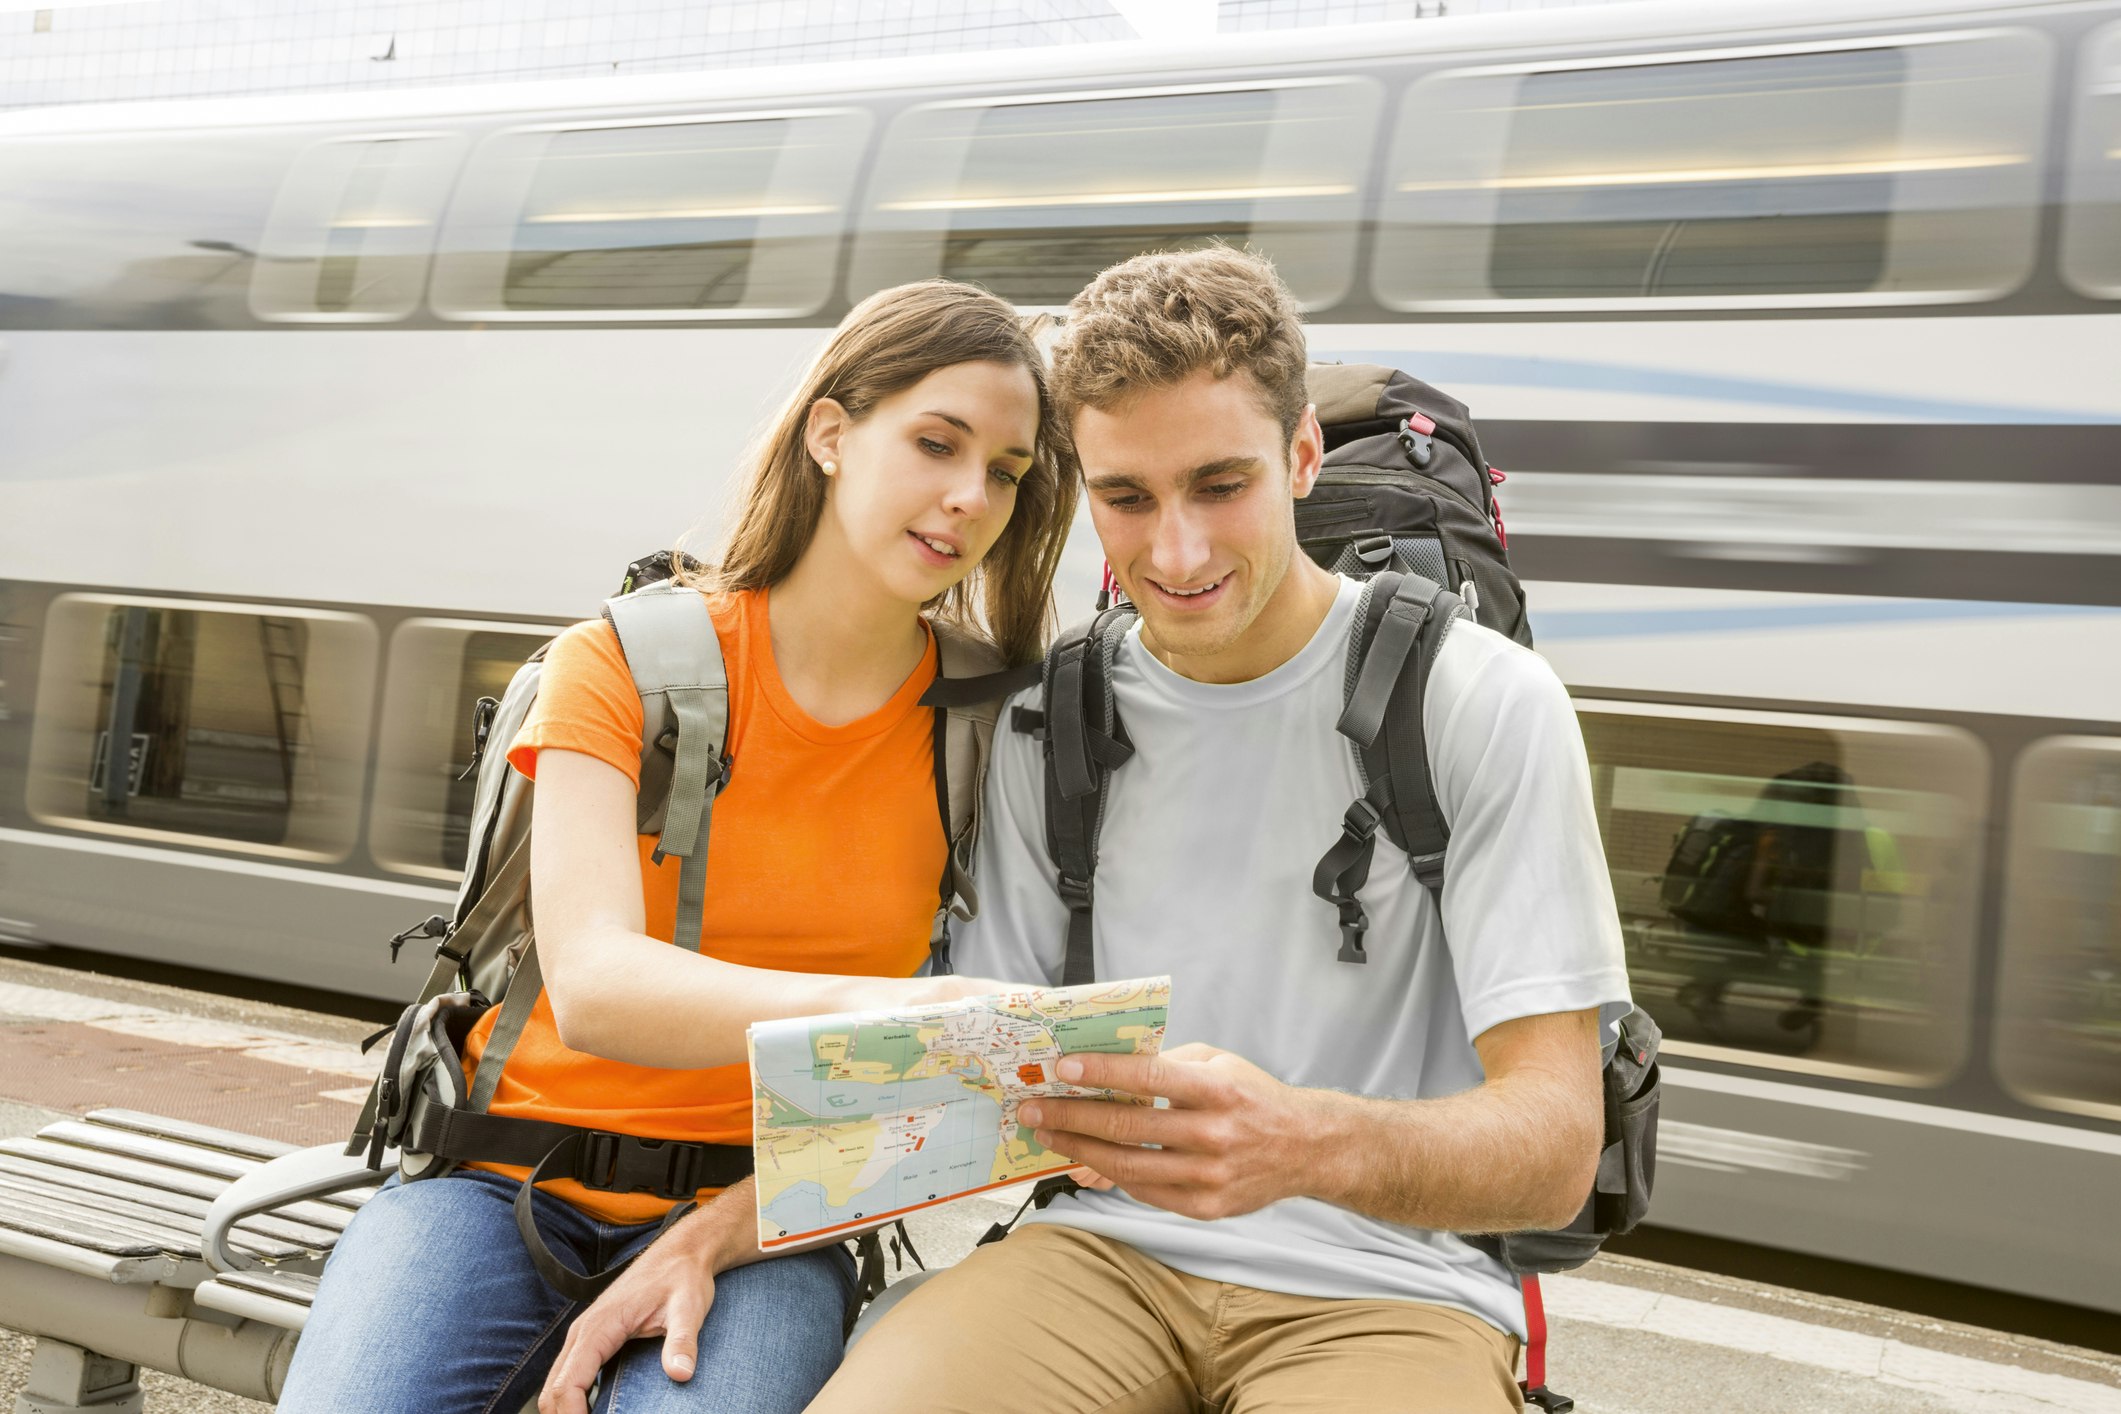 Travel News - Caucasian couples sitting on bench near train reading map